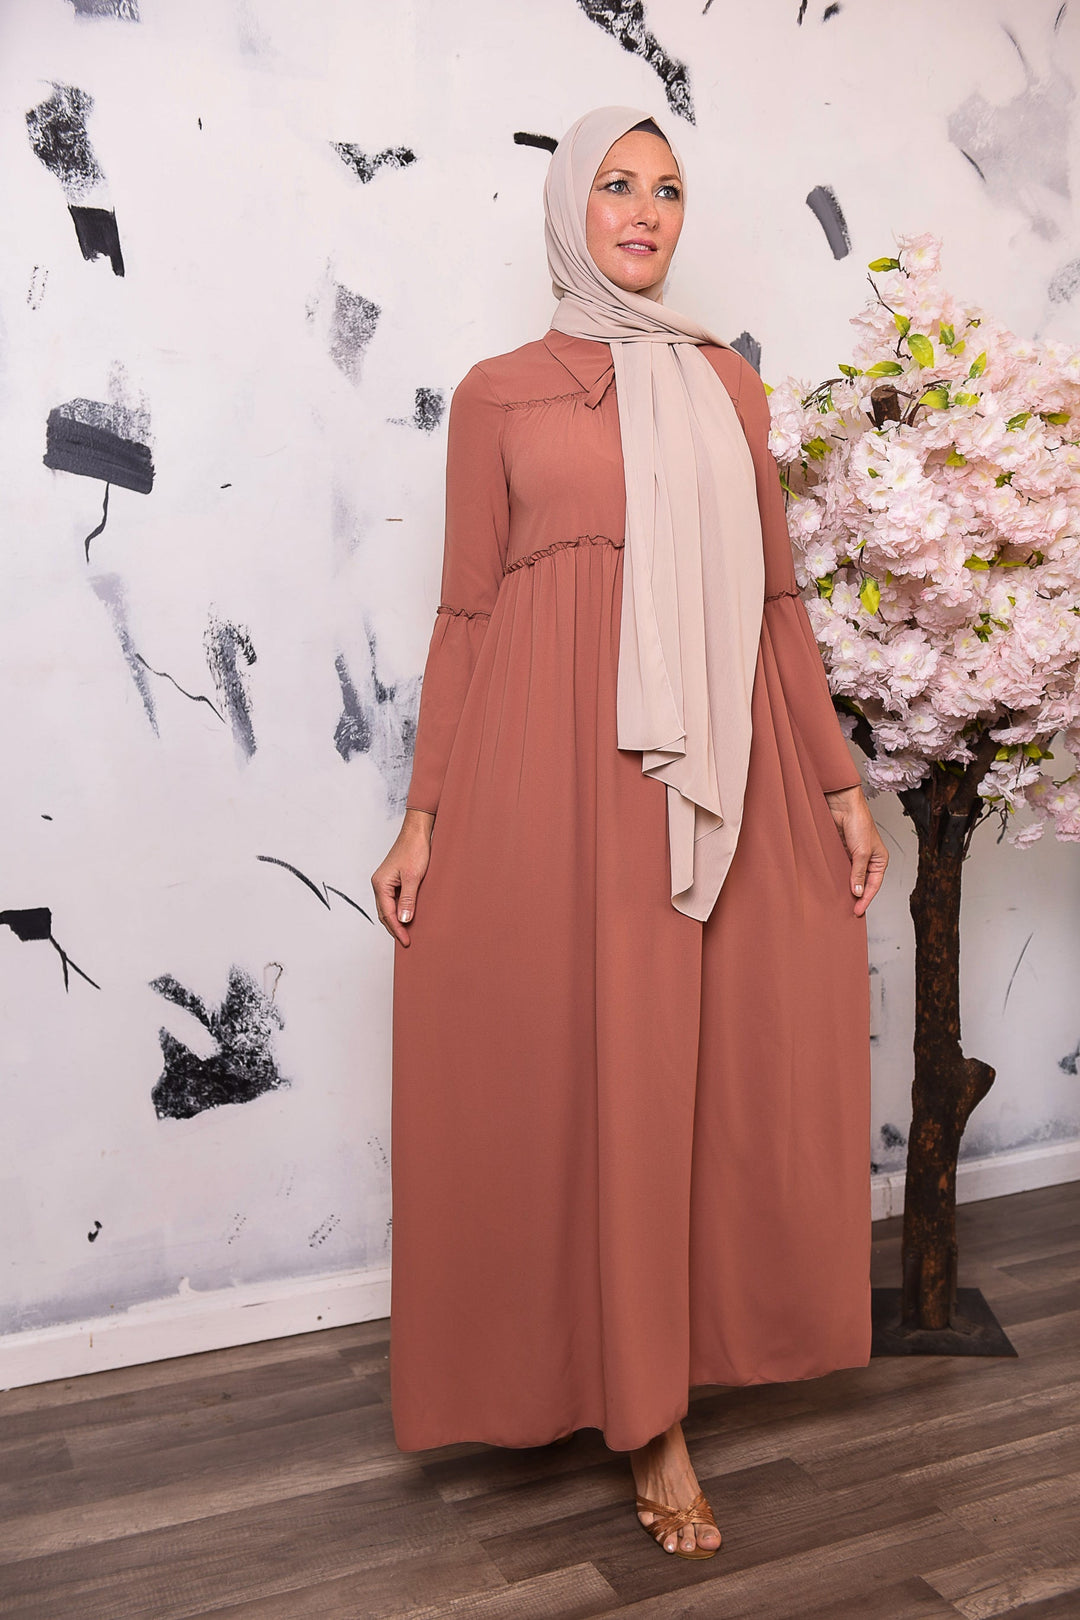 Get trendy with Alima Dress - Peach Brown -  available at Voilee NY. Grab yours for $12.99 today!